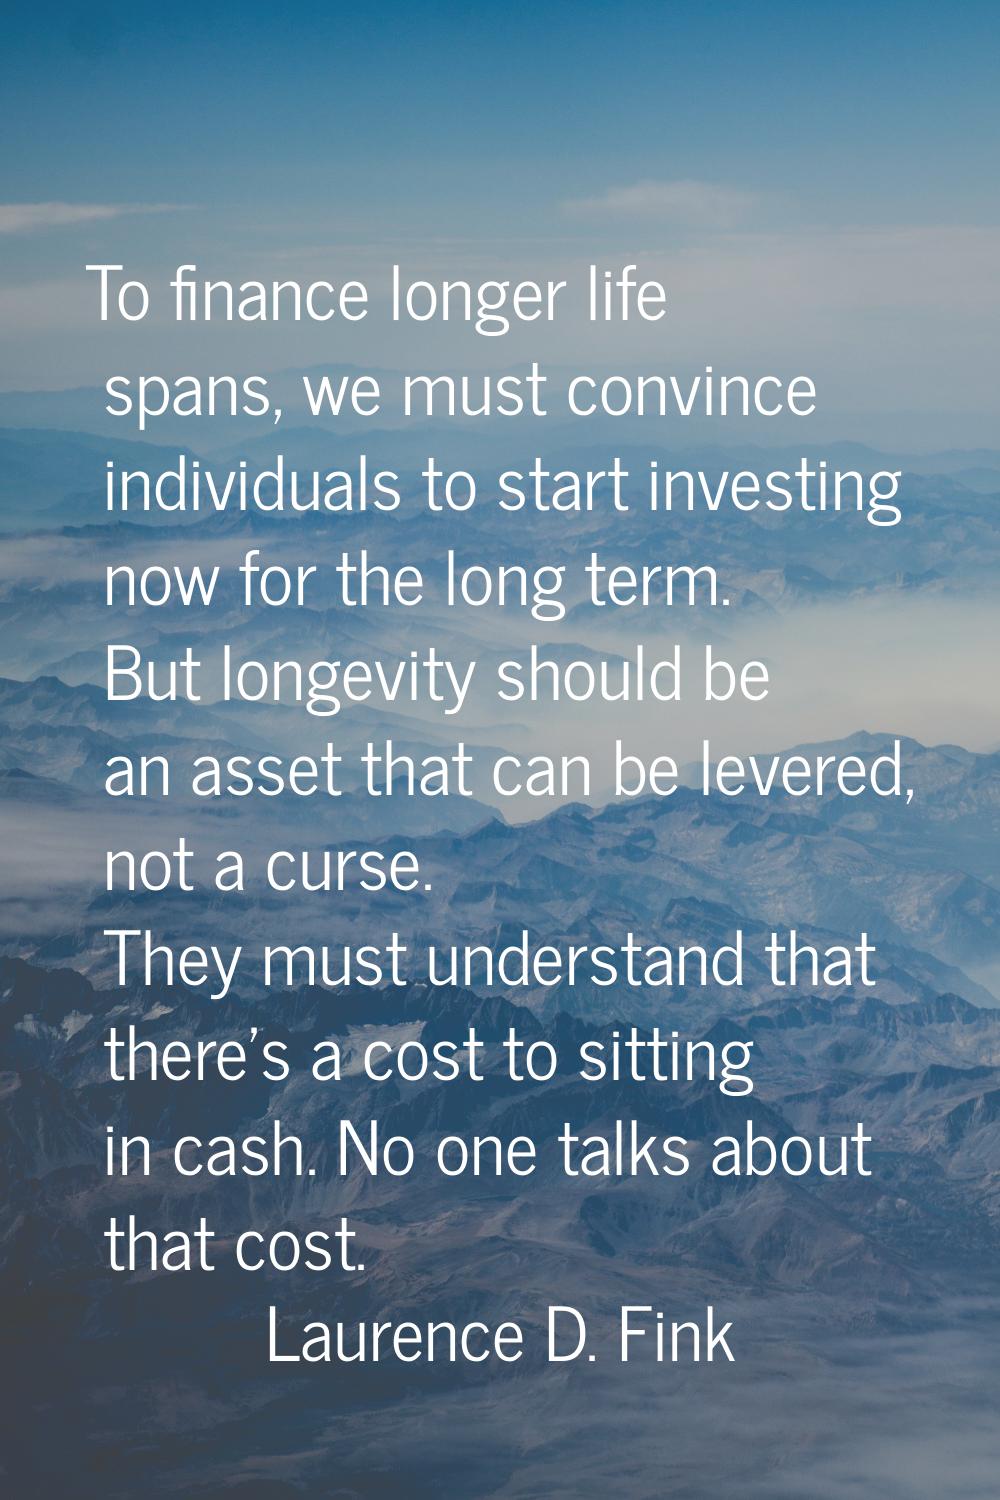 To finance longer life spans, we must convince individuals to start investing now for the long term